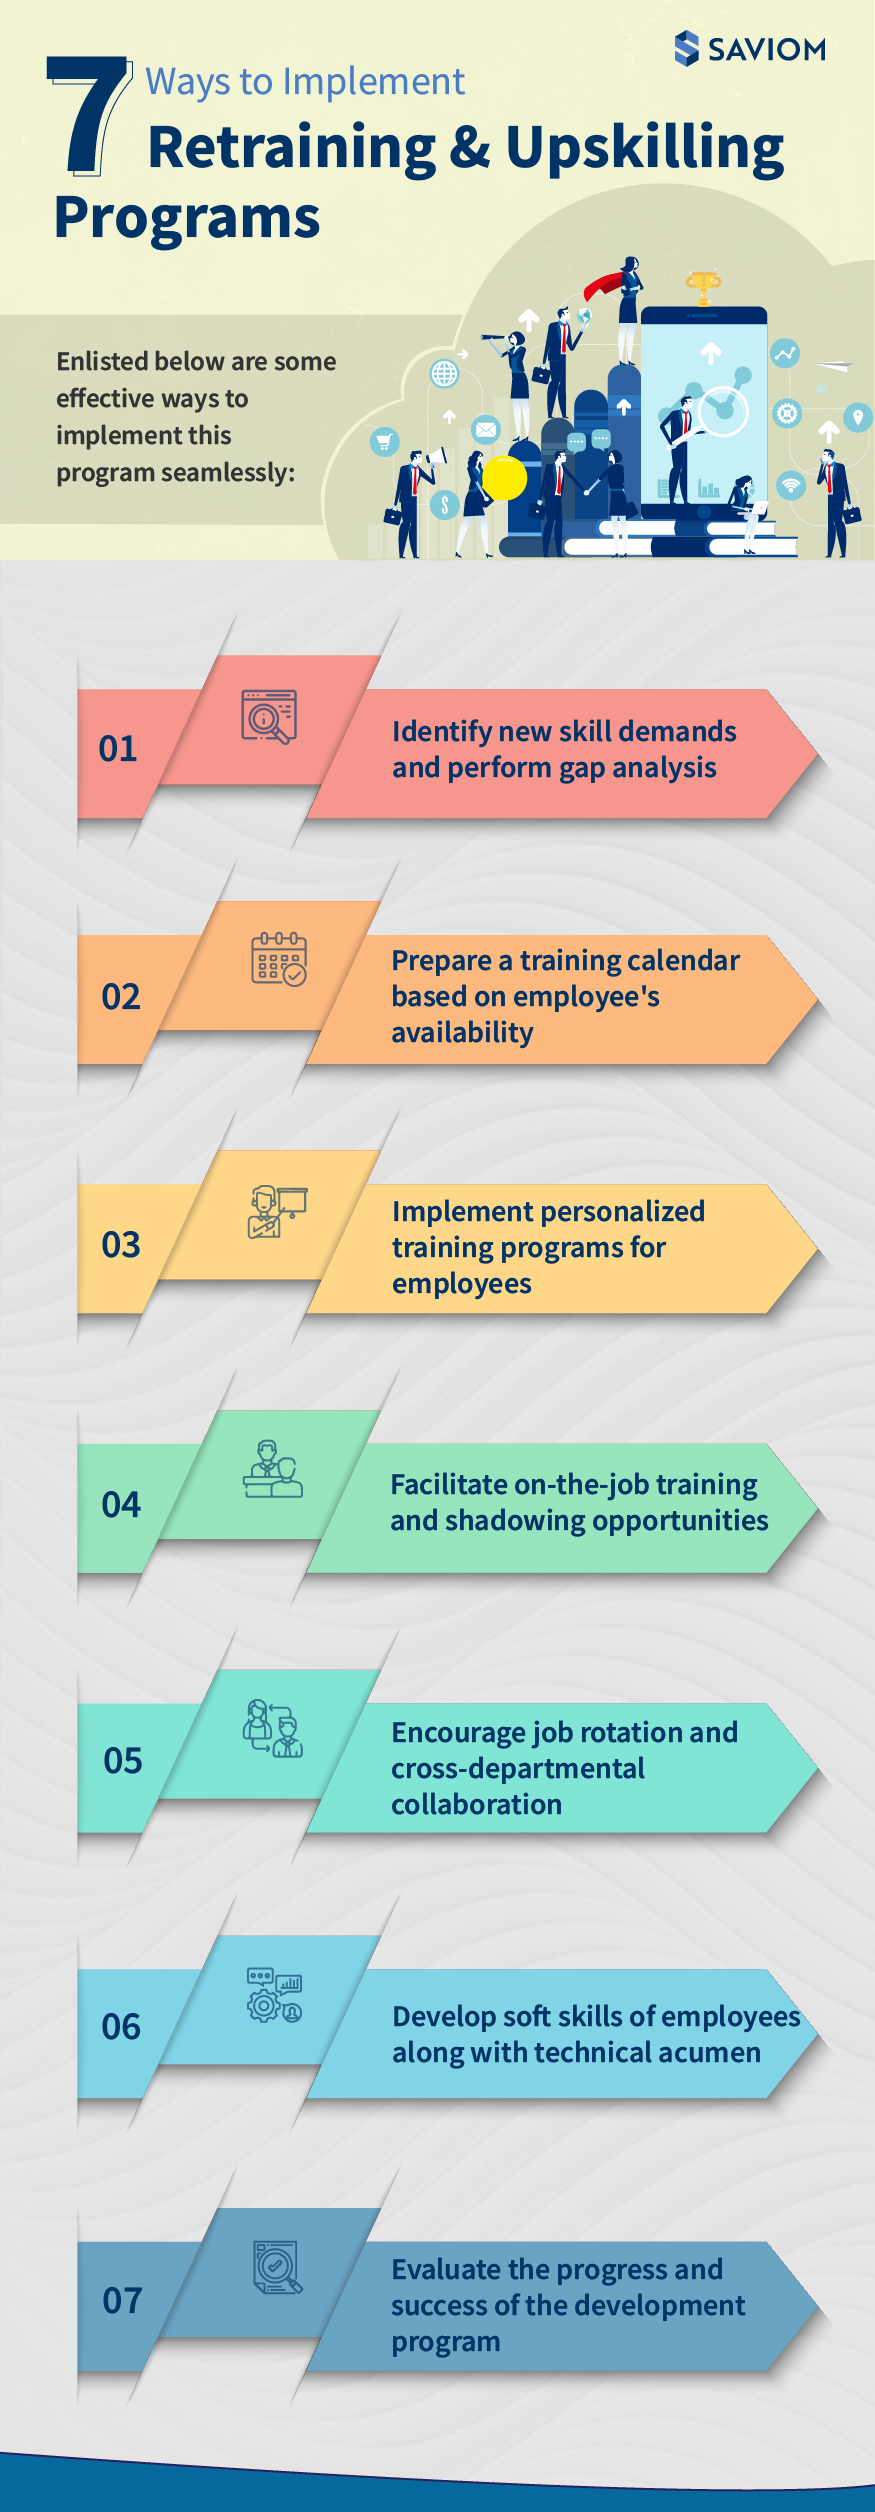 How Can Retraining/Upskilling Future-Proof Your Workforce?